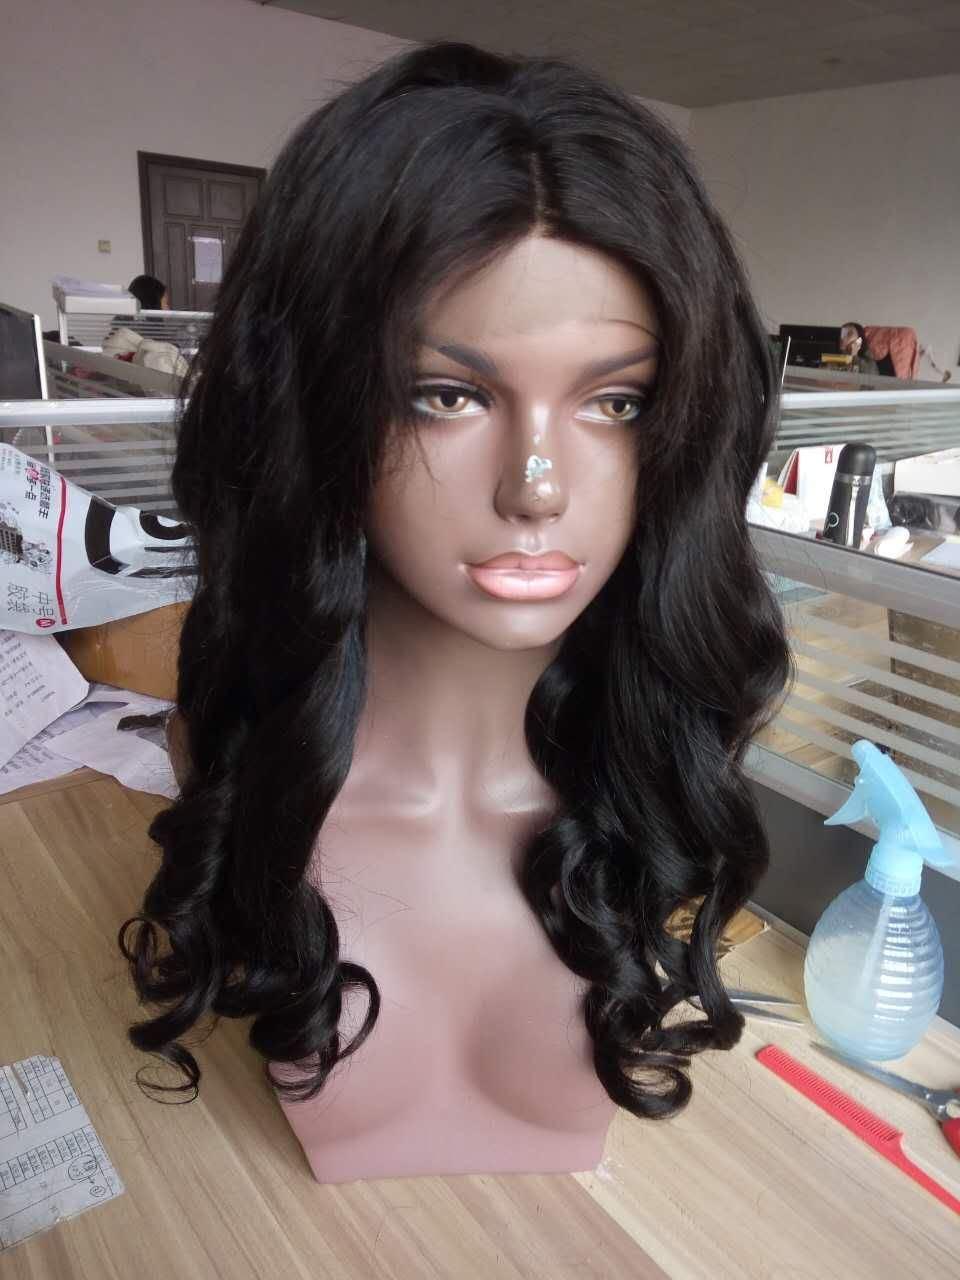 Factory Price High Quality Cuticle Aligned Wigs Body Wave Wig